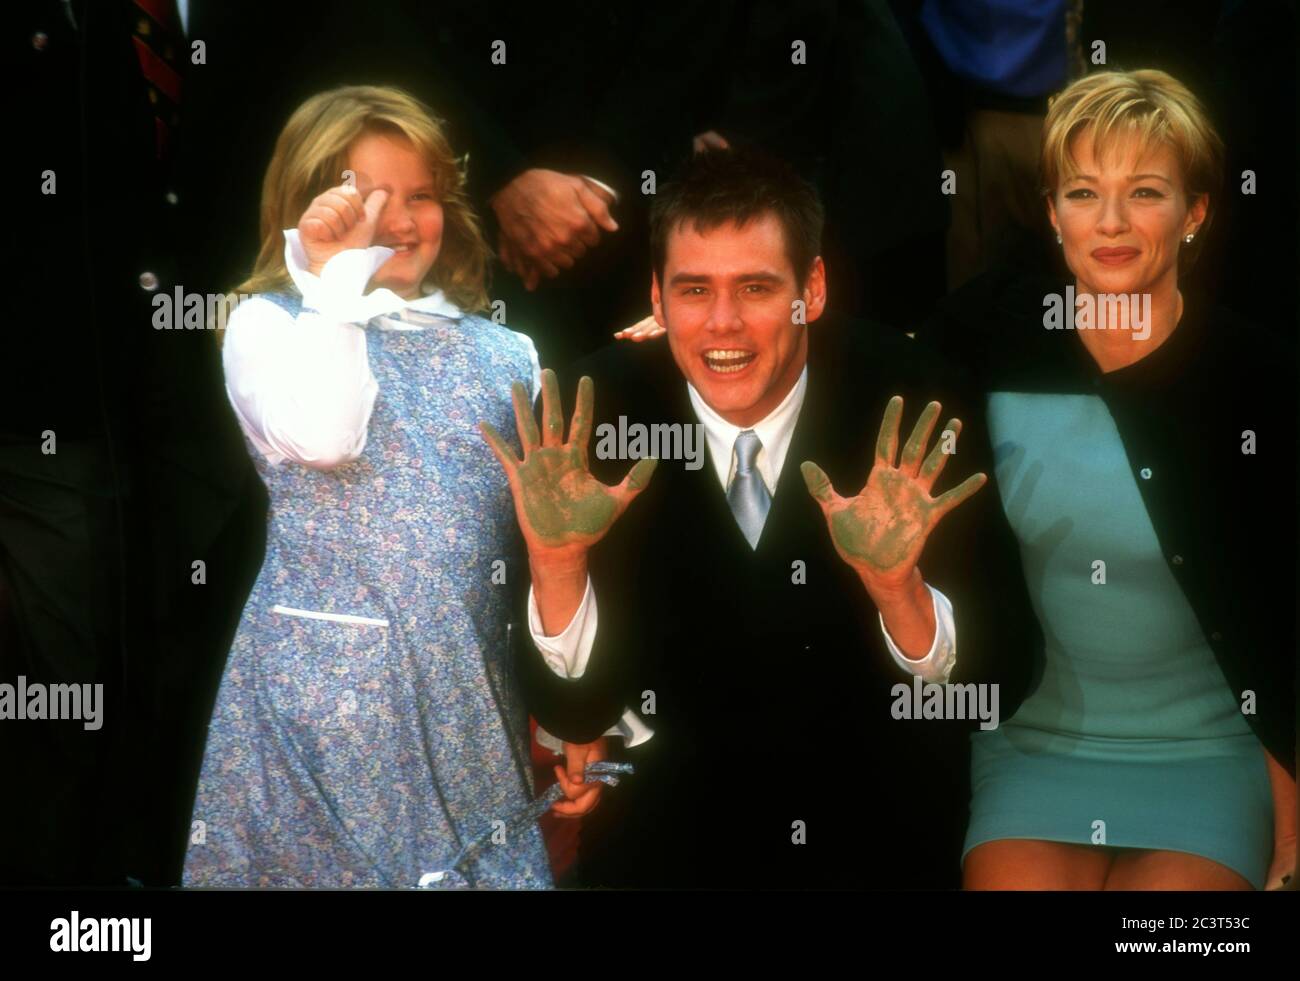 Hollywood, California, USA 2nd November 1995 Actor Jim Carrey, daughter Jane Carrey and actress Lauren Holly attend Jim Carrey's hand and footprint in cement ceremony on November 2, 1995 at Mann's Chinese Theatre in Hollywood, California, USA. Photo by Barry King/Alamy Stock Photo Stock Photo